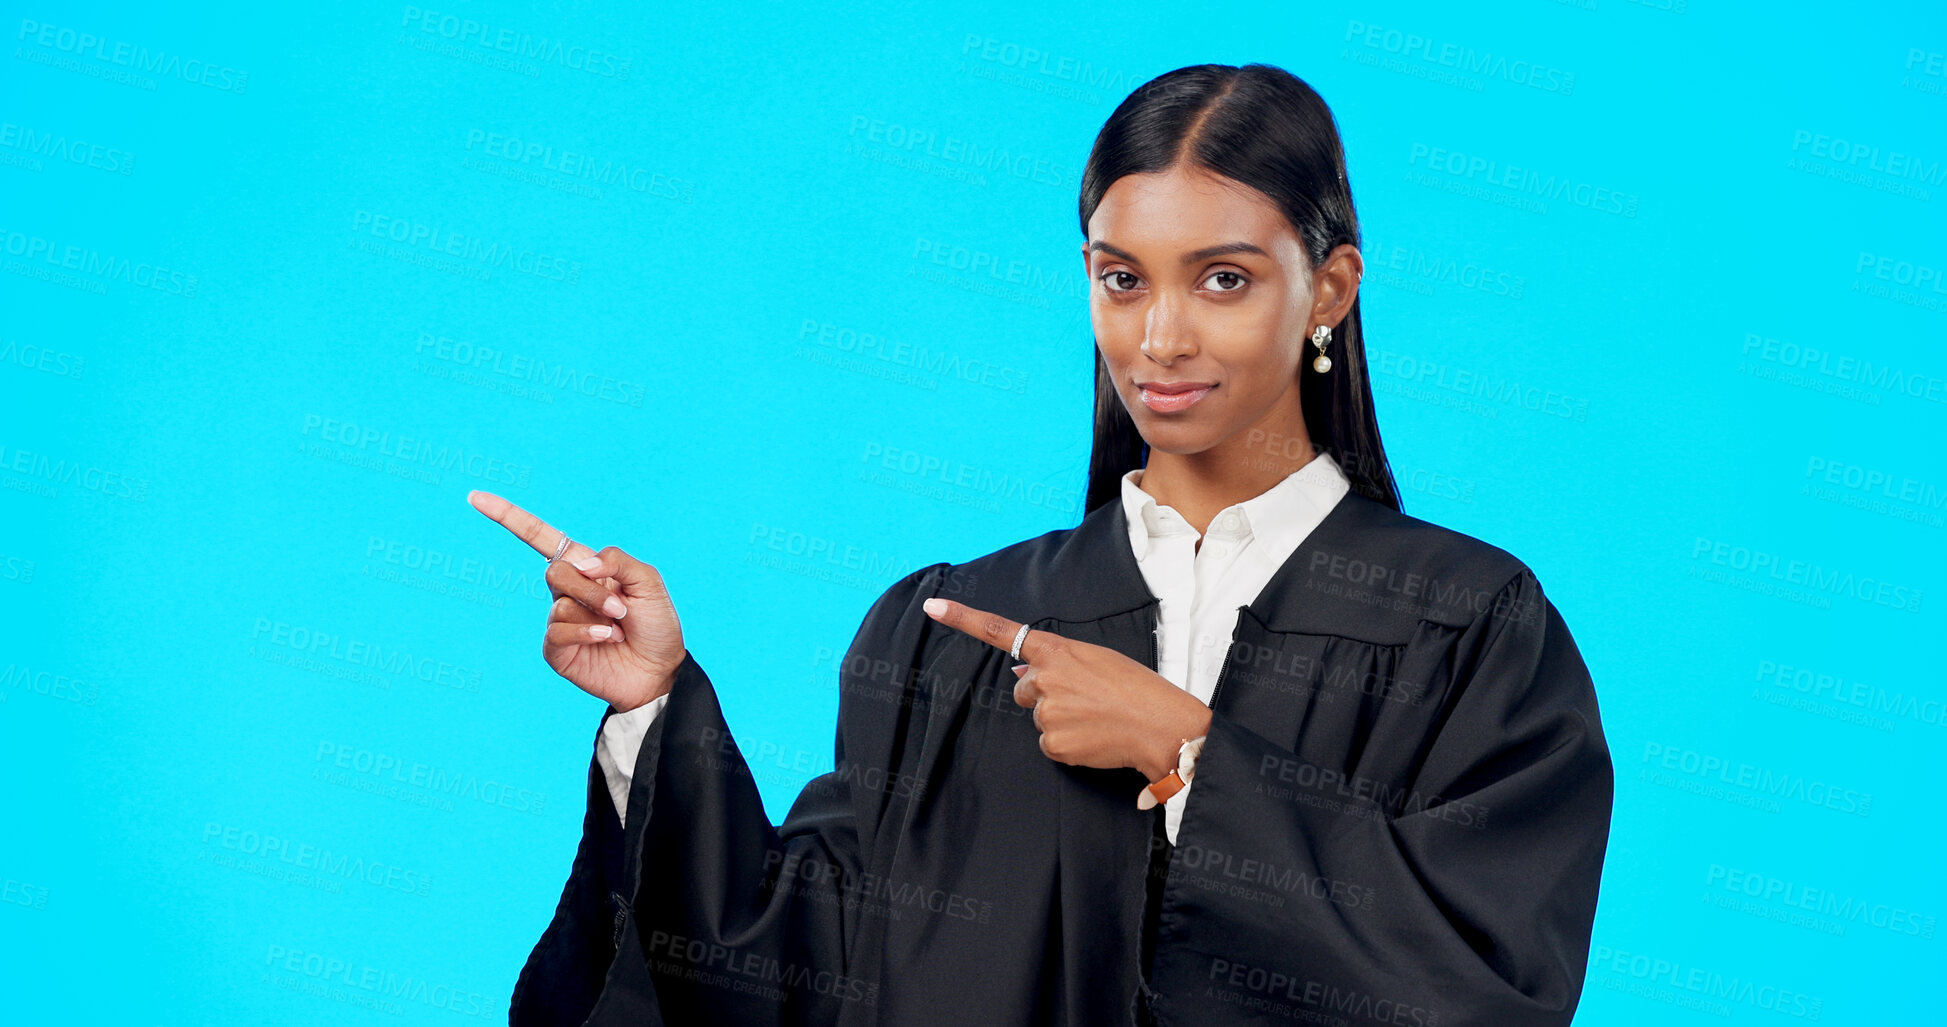 Buy stock photo Studio portrait, lawyer and woman point at legal offer, law firm promotion or government logo design, brand or advertising. Judge policy info, mockup space or attorney presentation on blue background